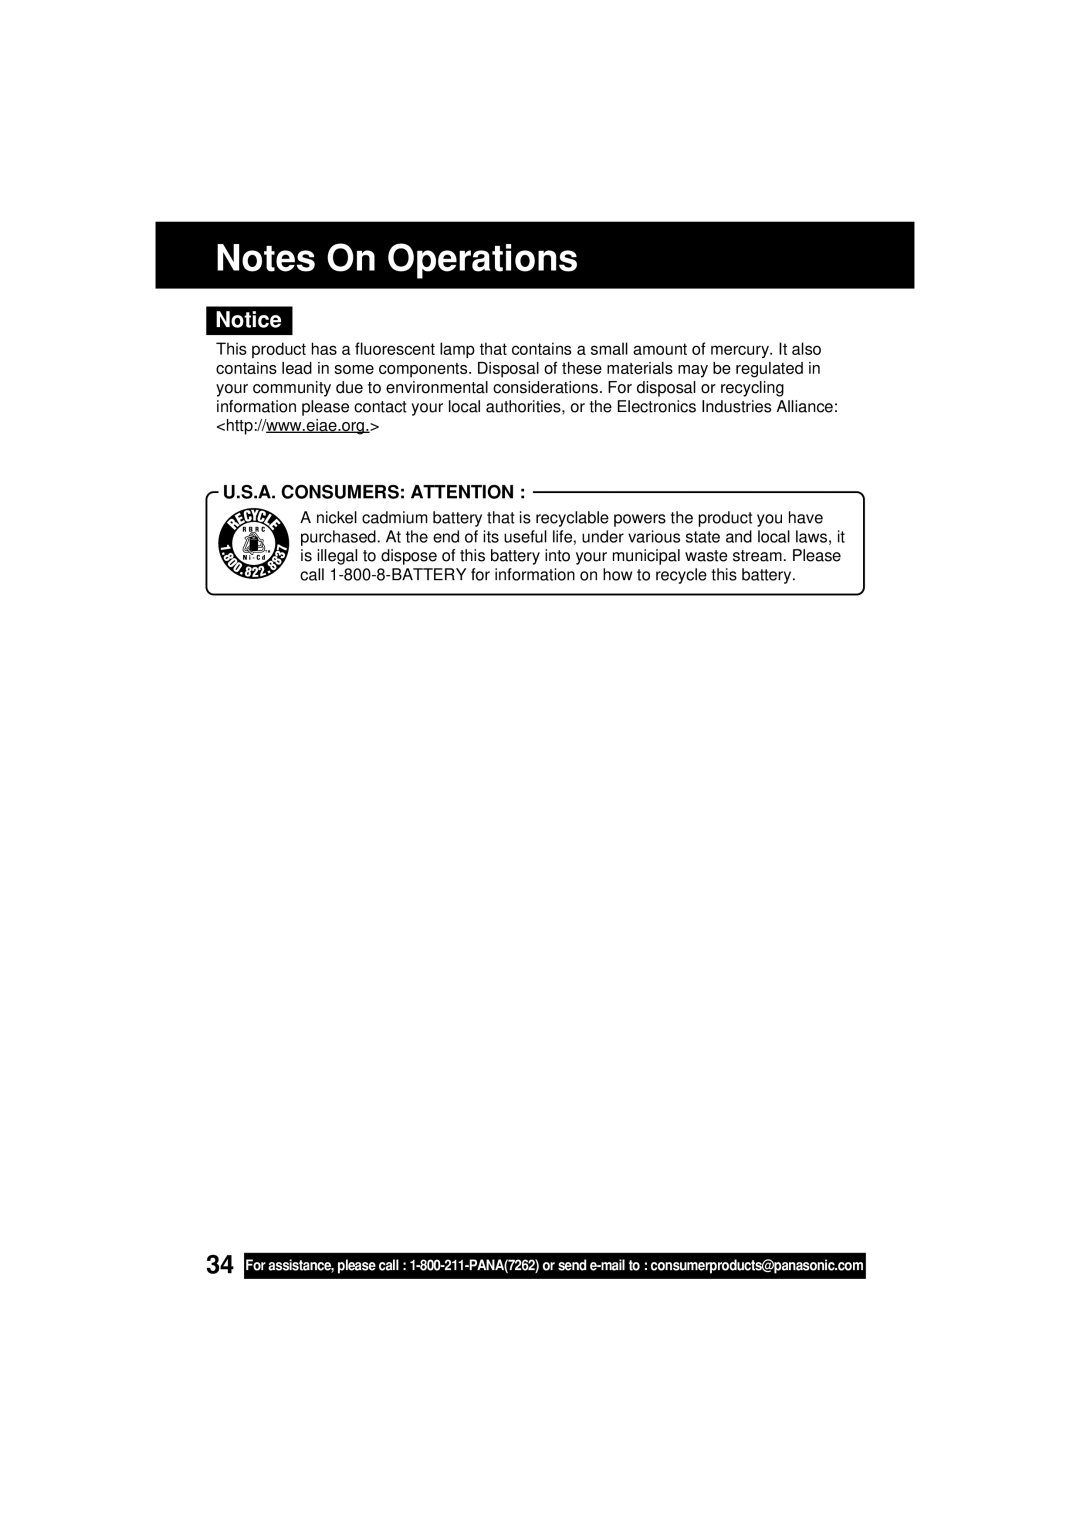 Panasonic VM-L153 operating instructions A. Consumers Attention 